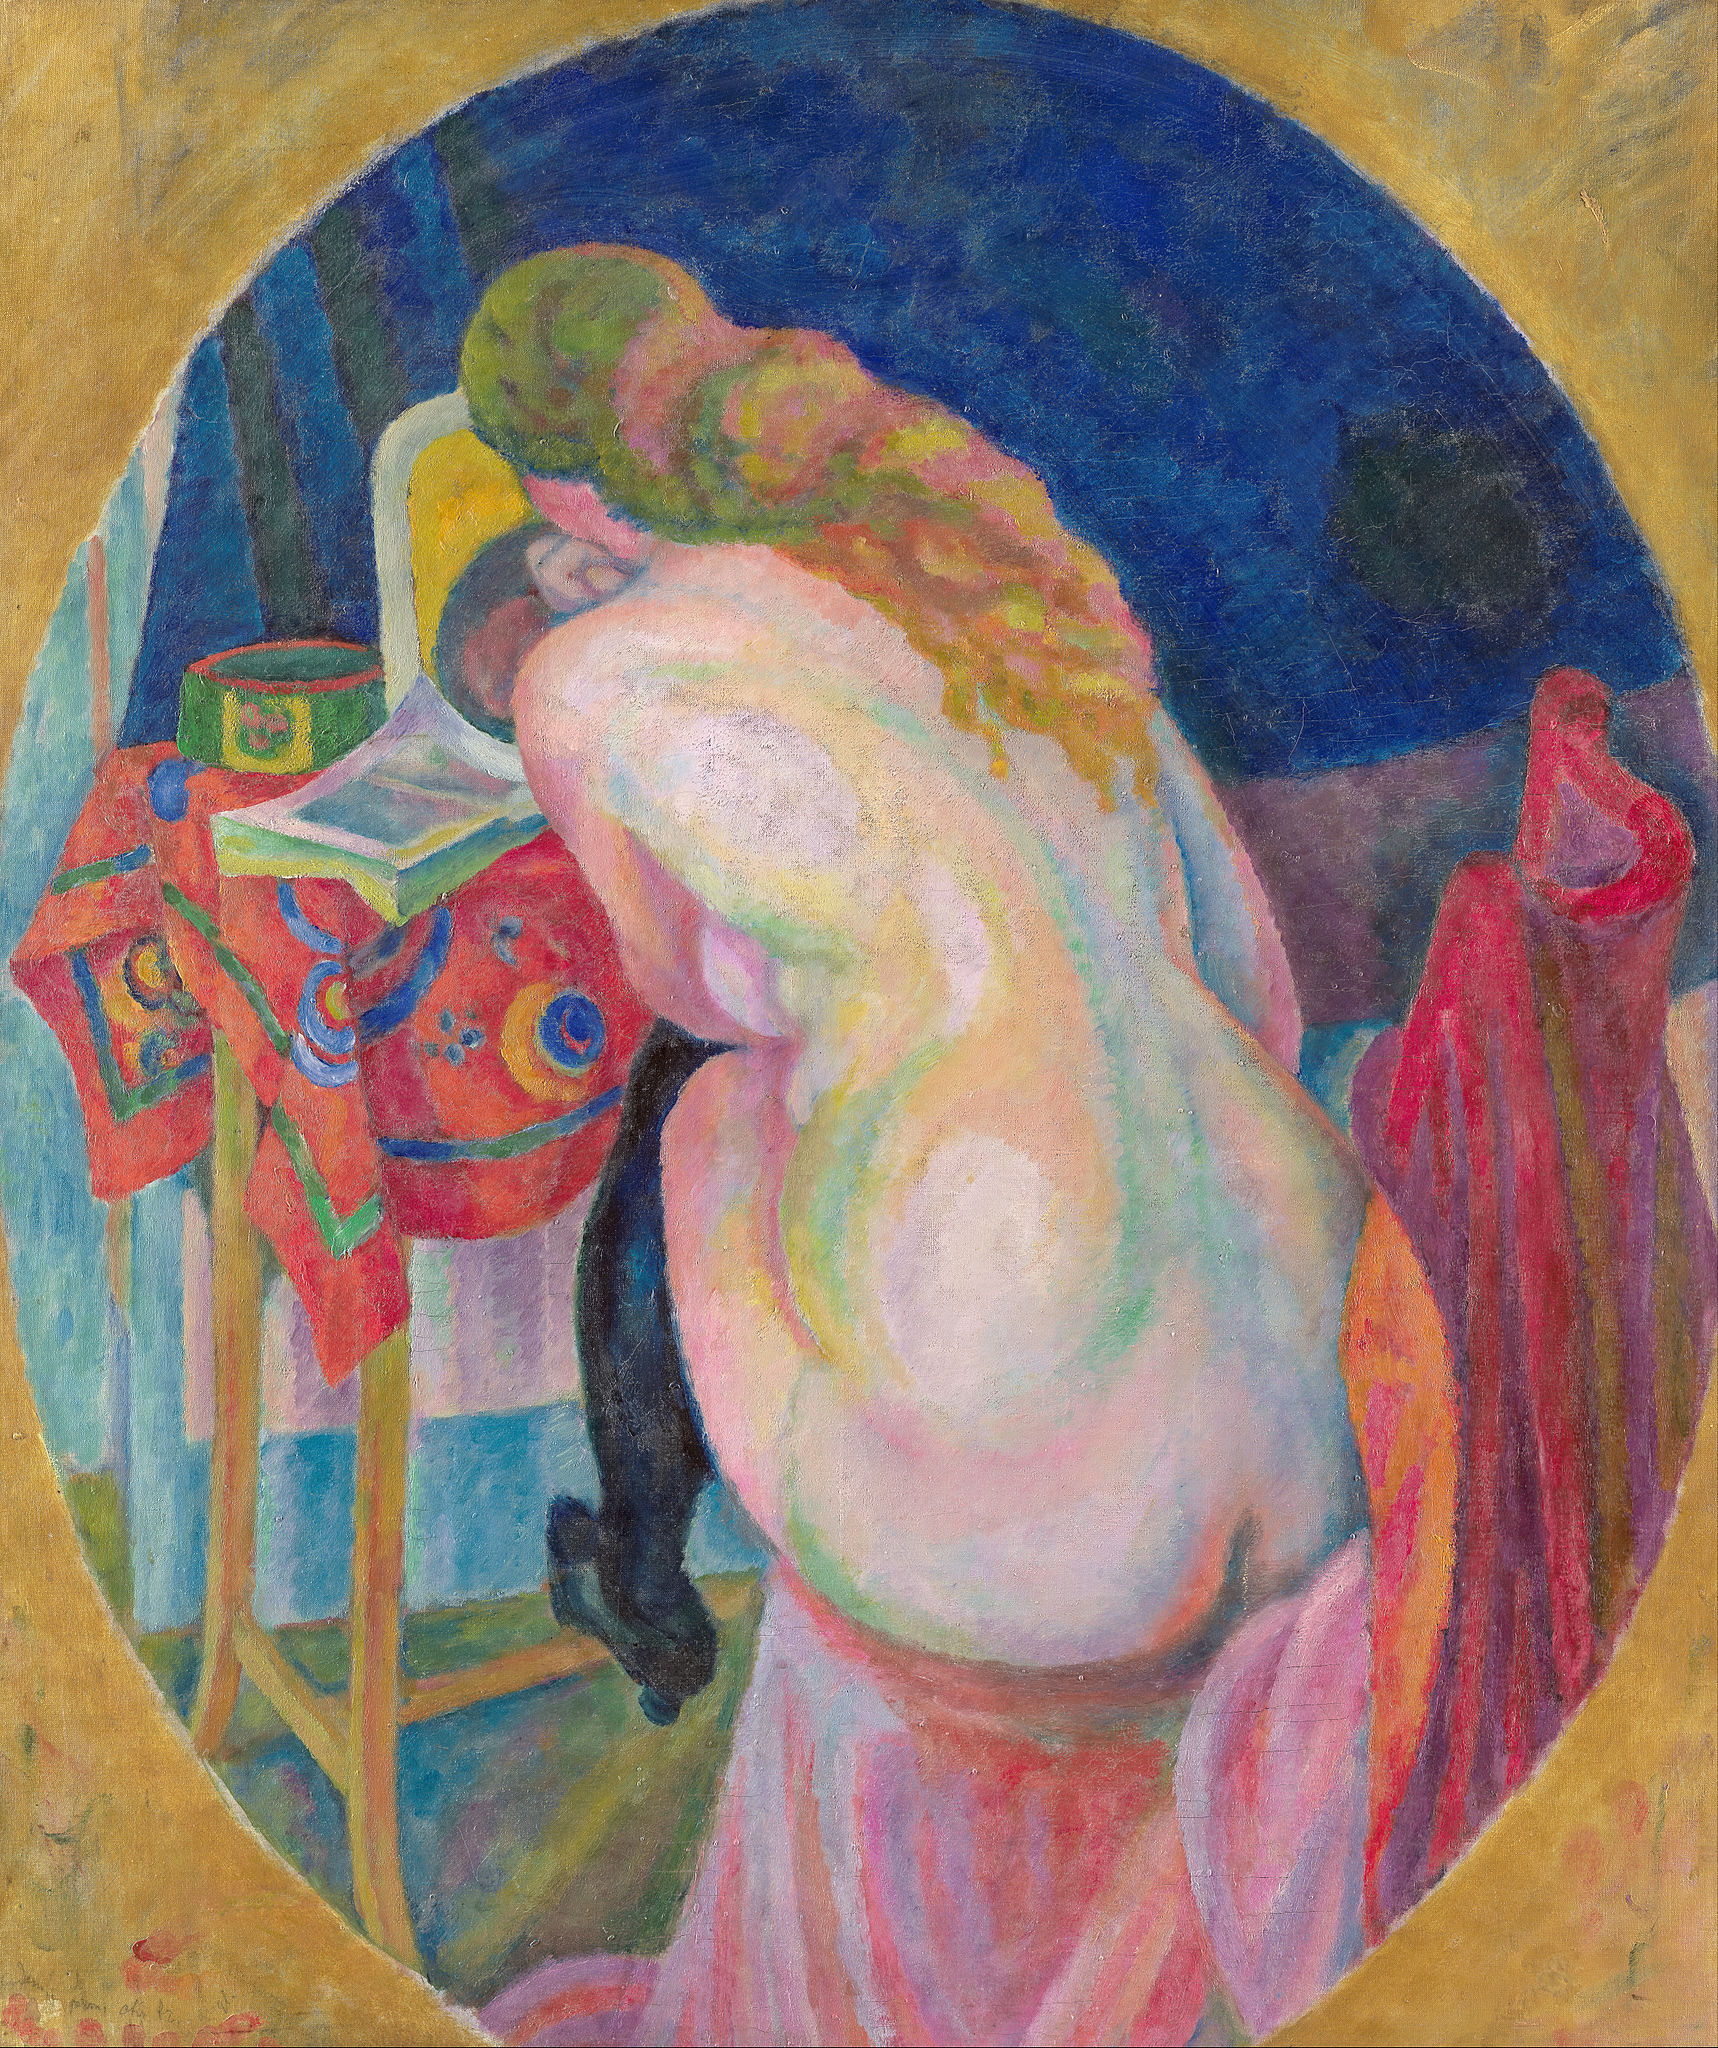 Nude Woman Reading by Robert Delaunay - 1915 - 86.2 x 72.4 cm National Gallery of Victoria